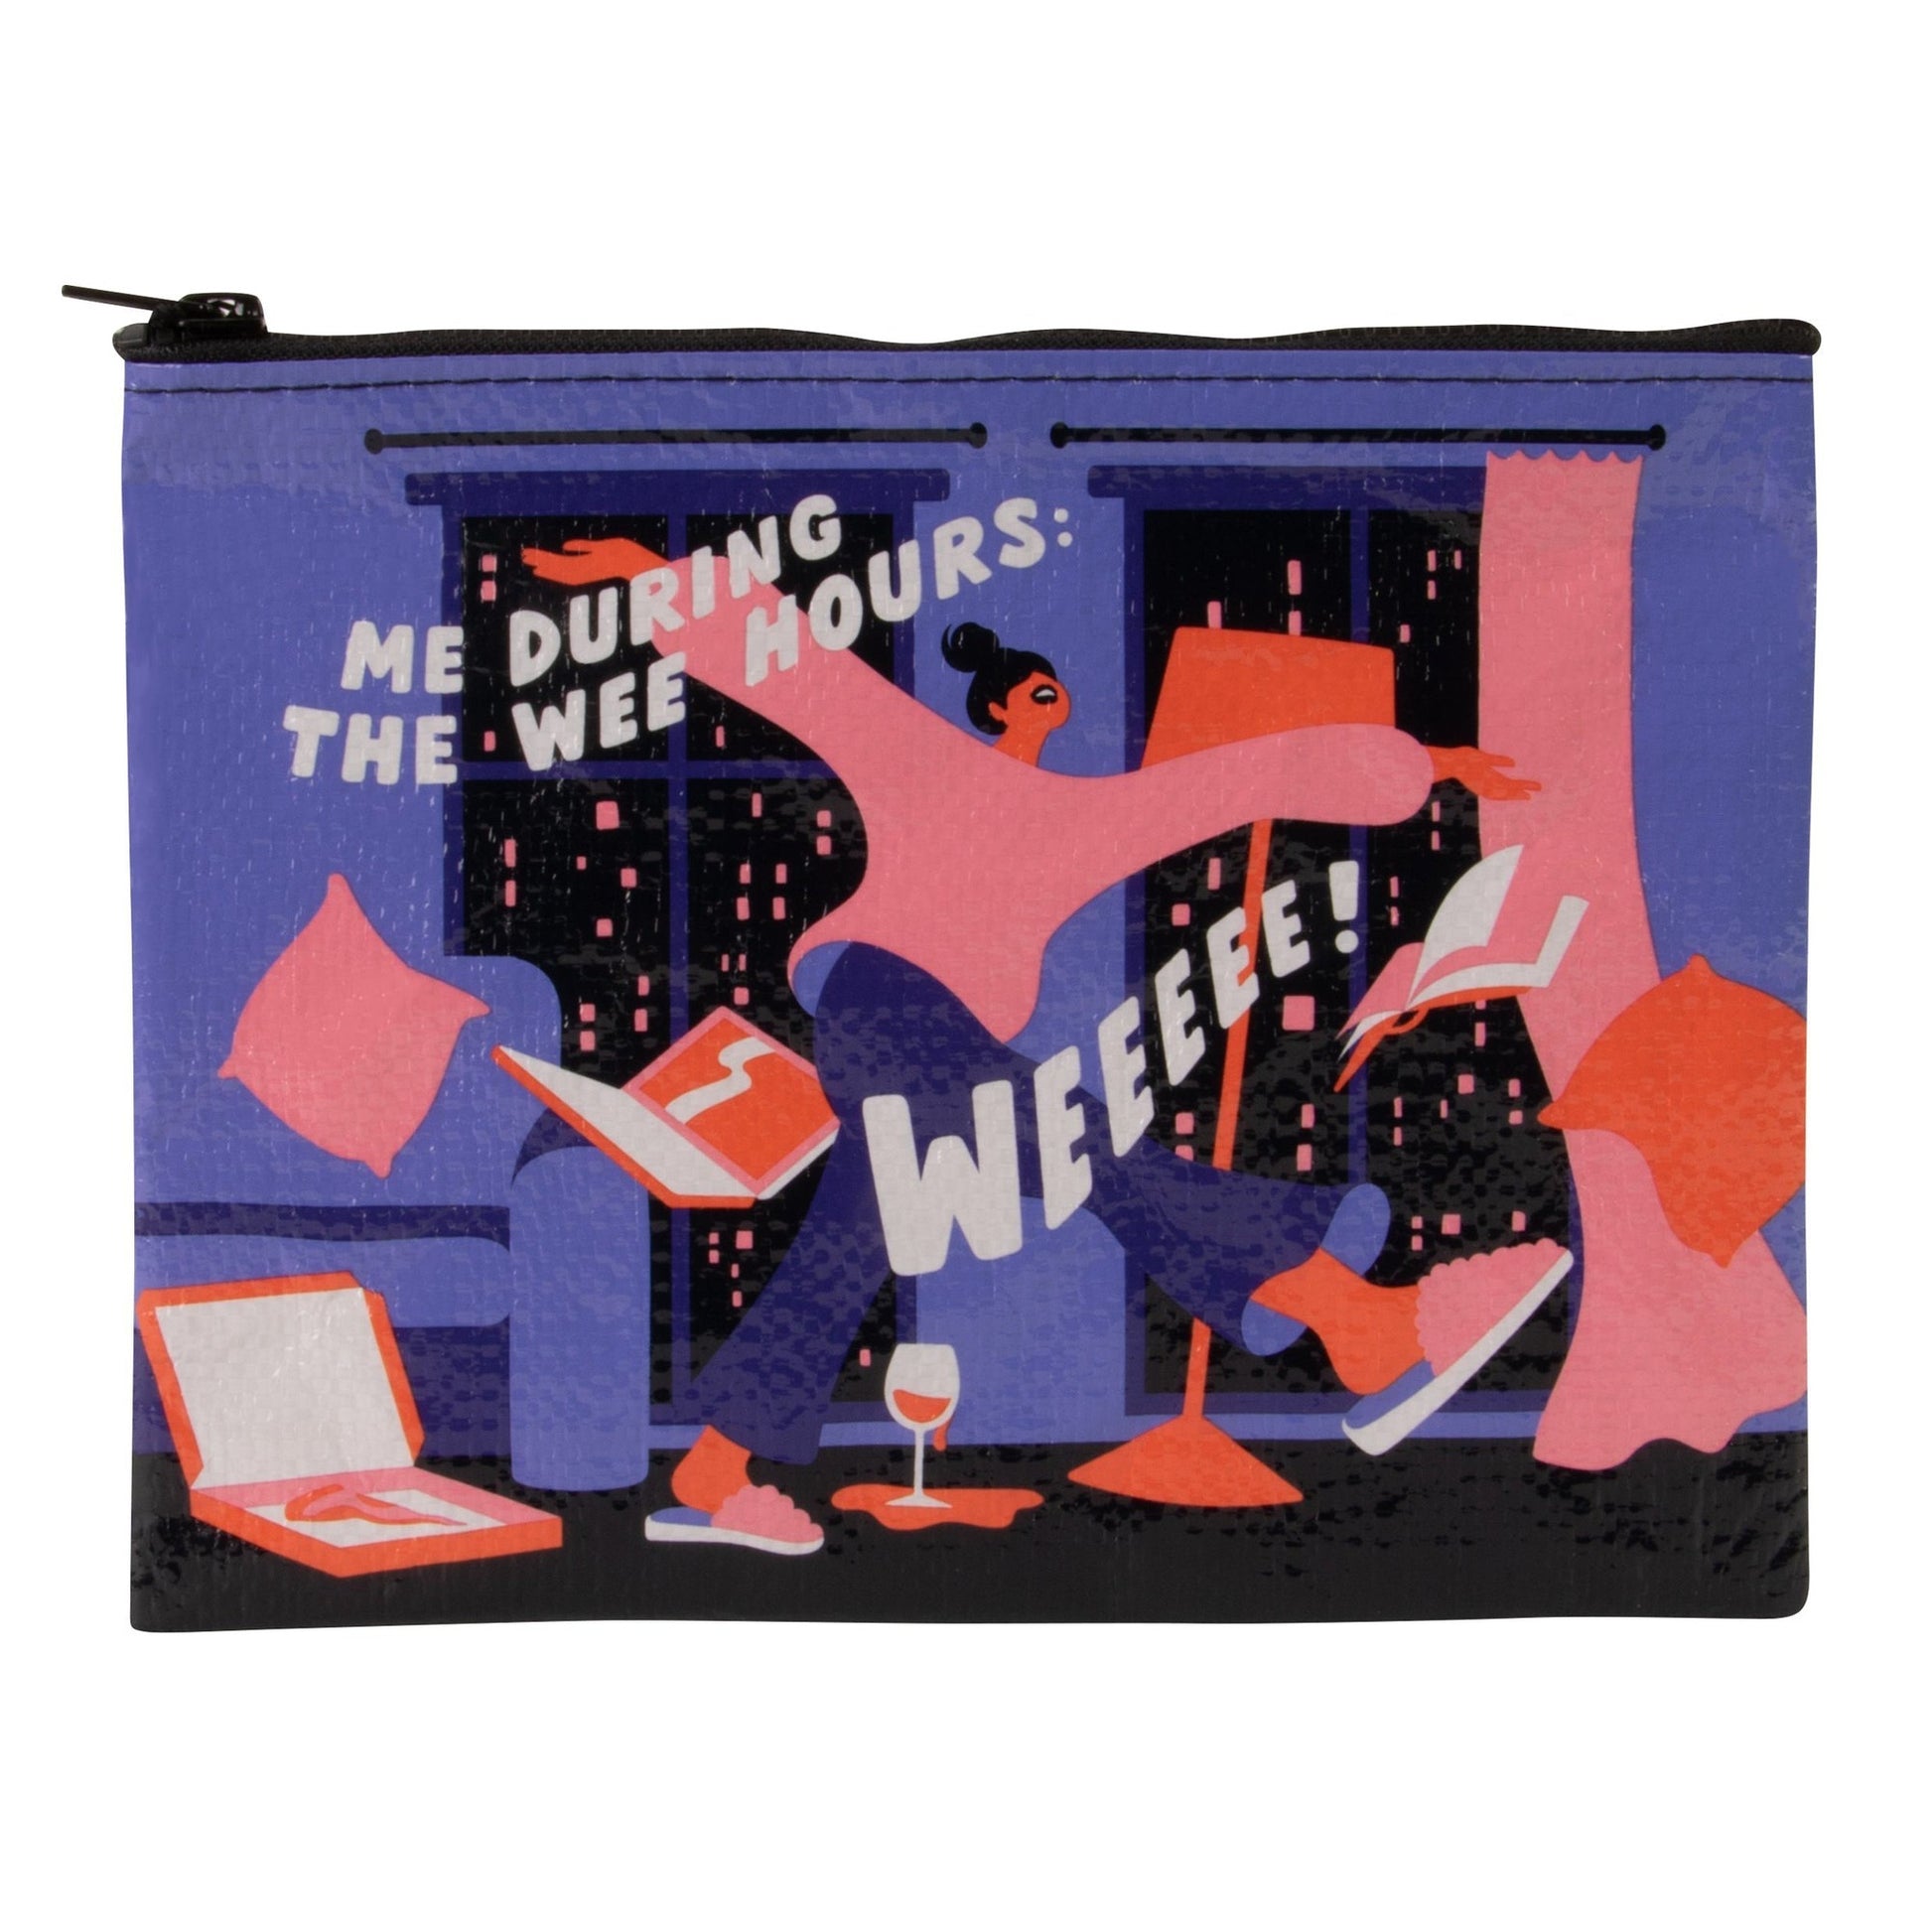 Me During The Wee Hours (Weeeee!) Recycled Material Zipper Pouch